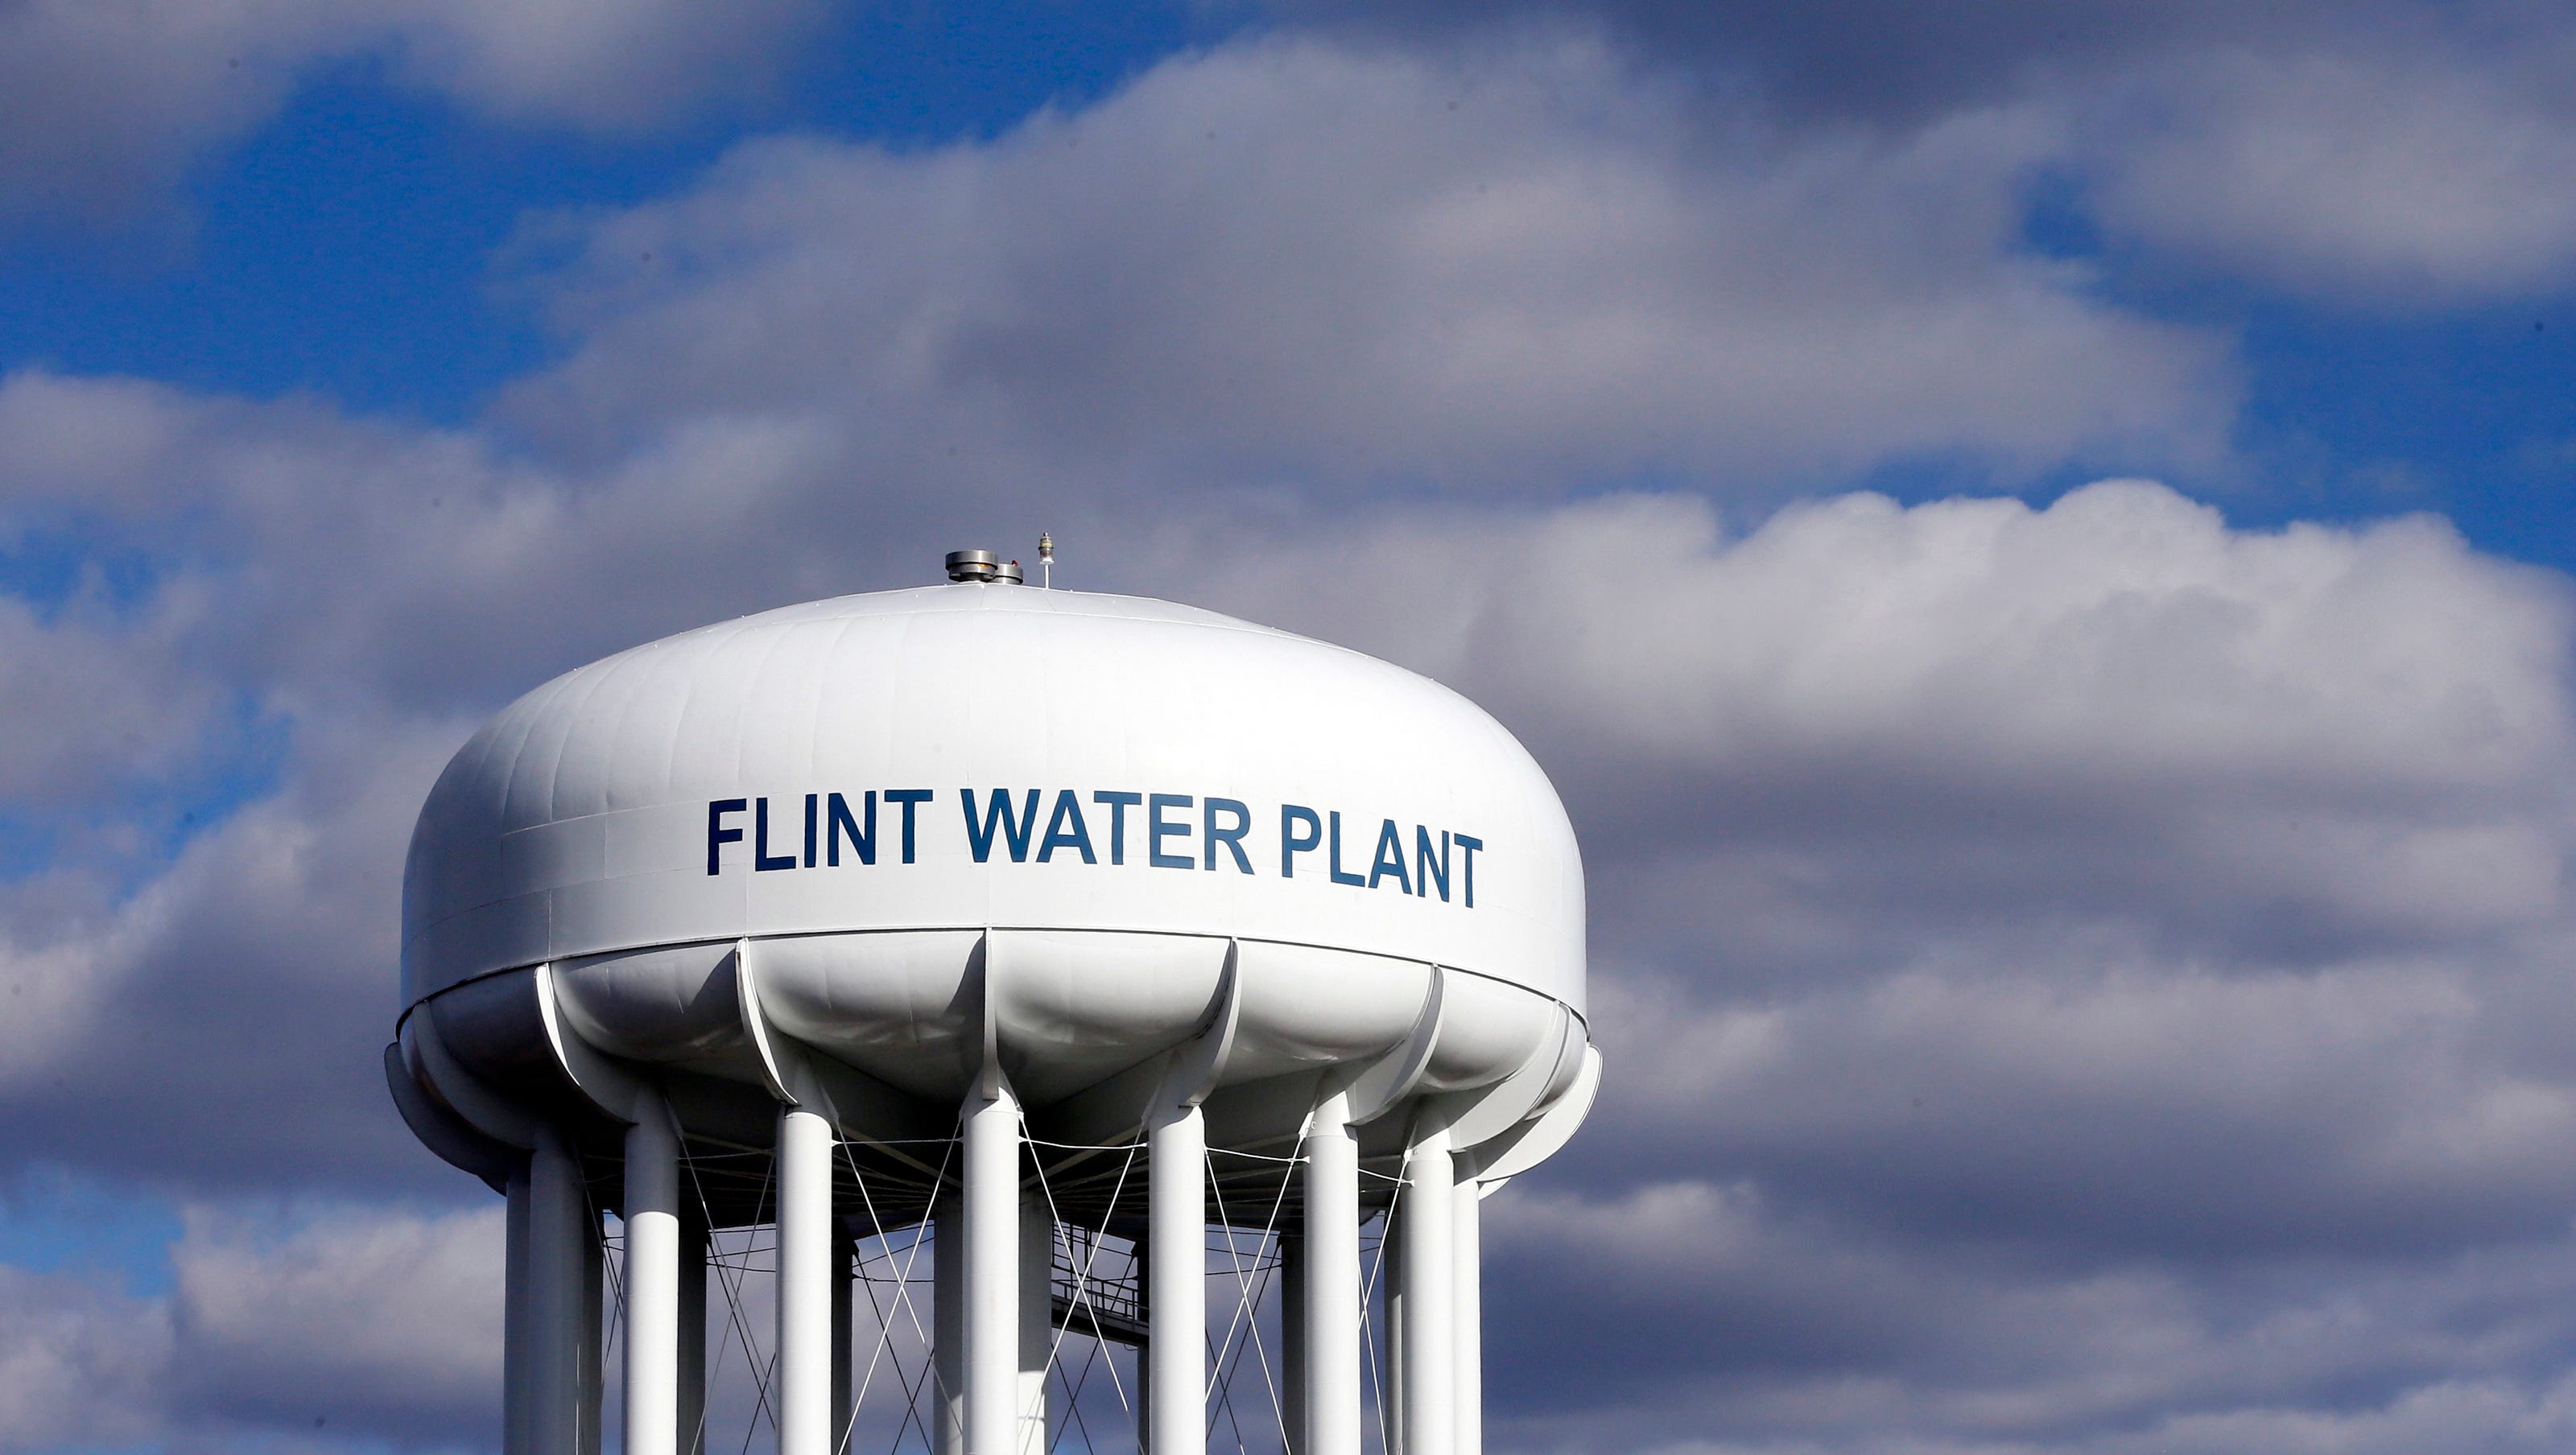 Over 45,000 sign up for $641M Flint water settlement, but final tally not ready - The Detroit News